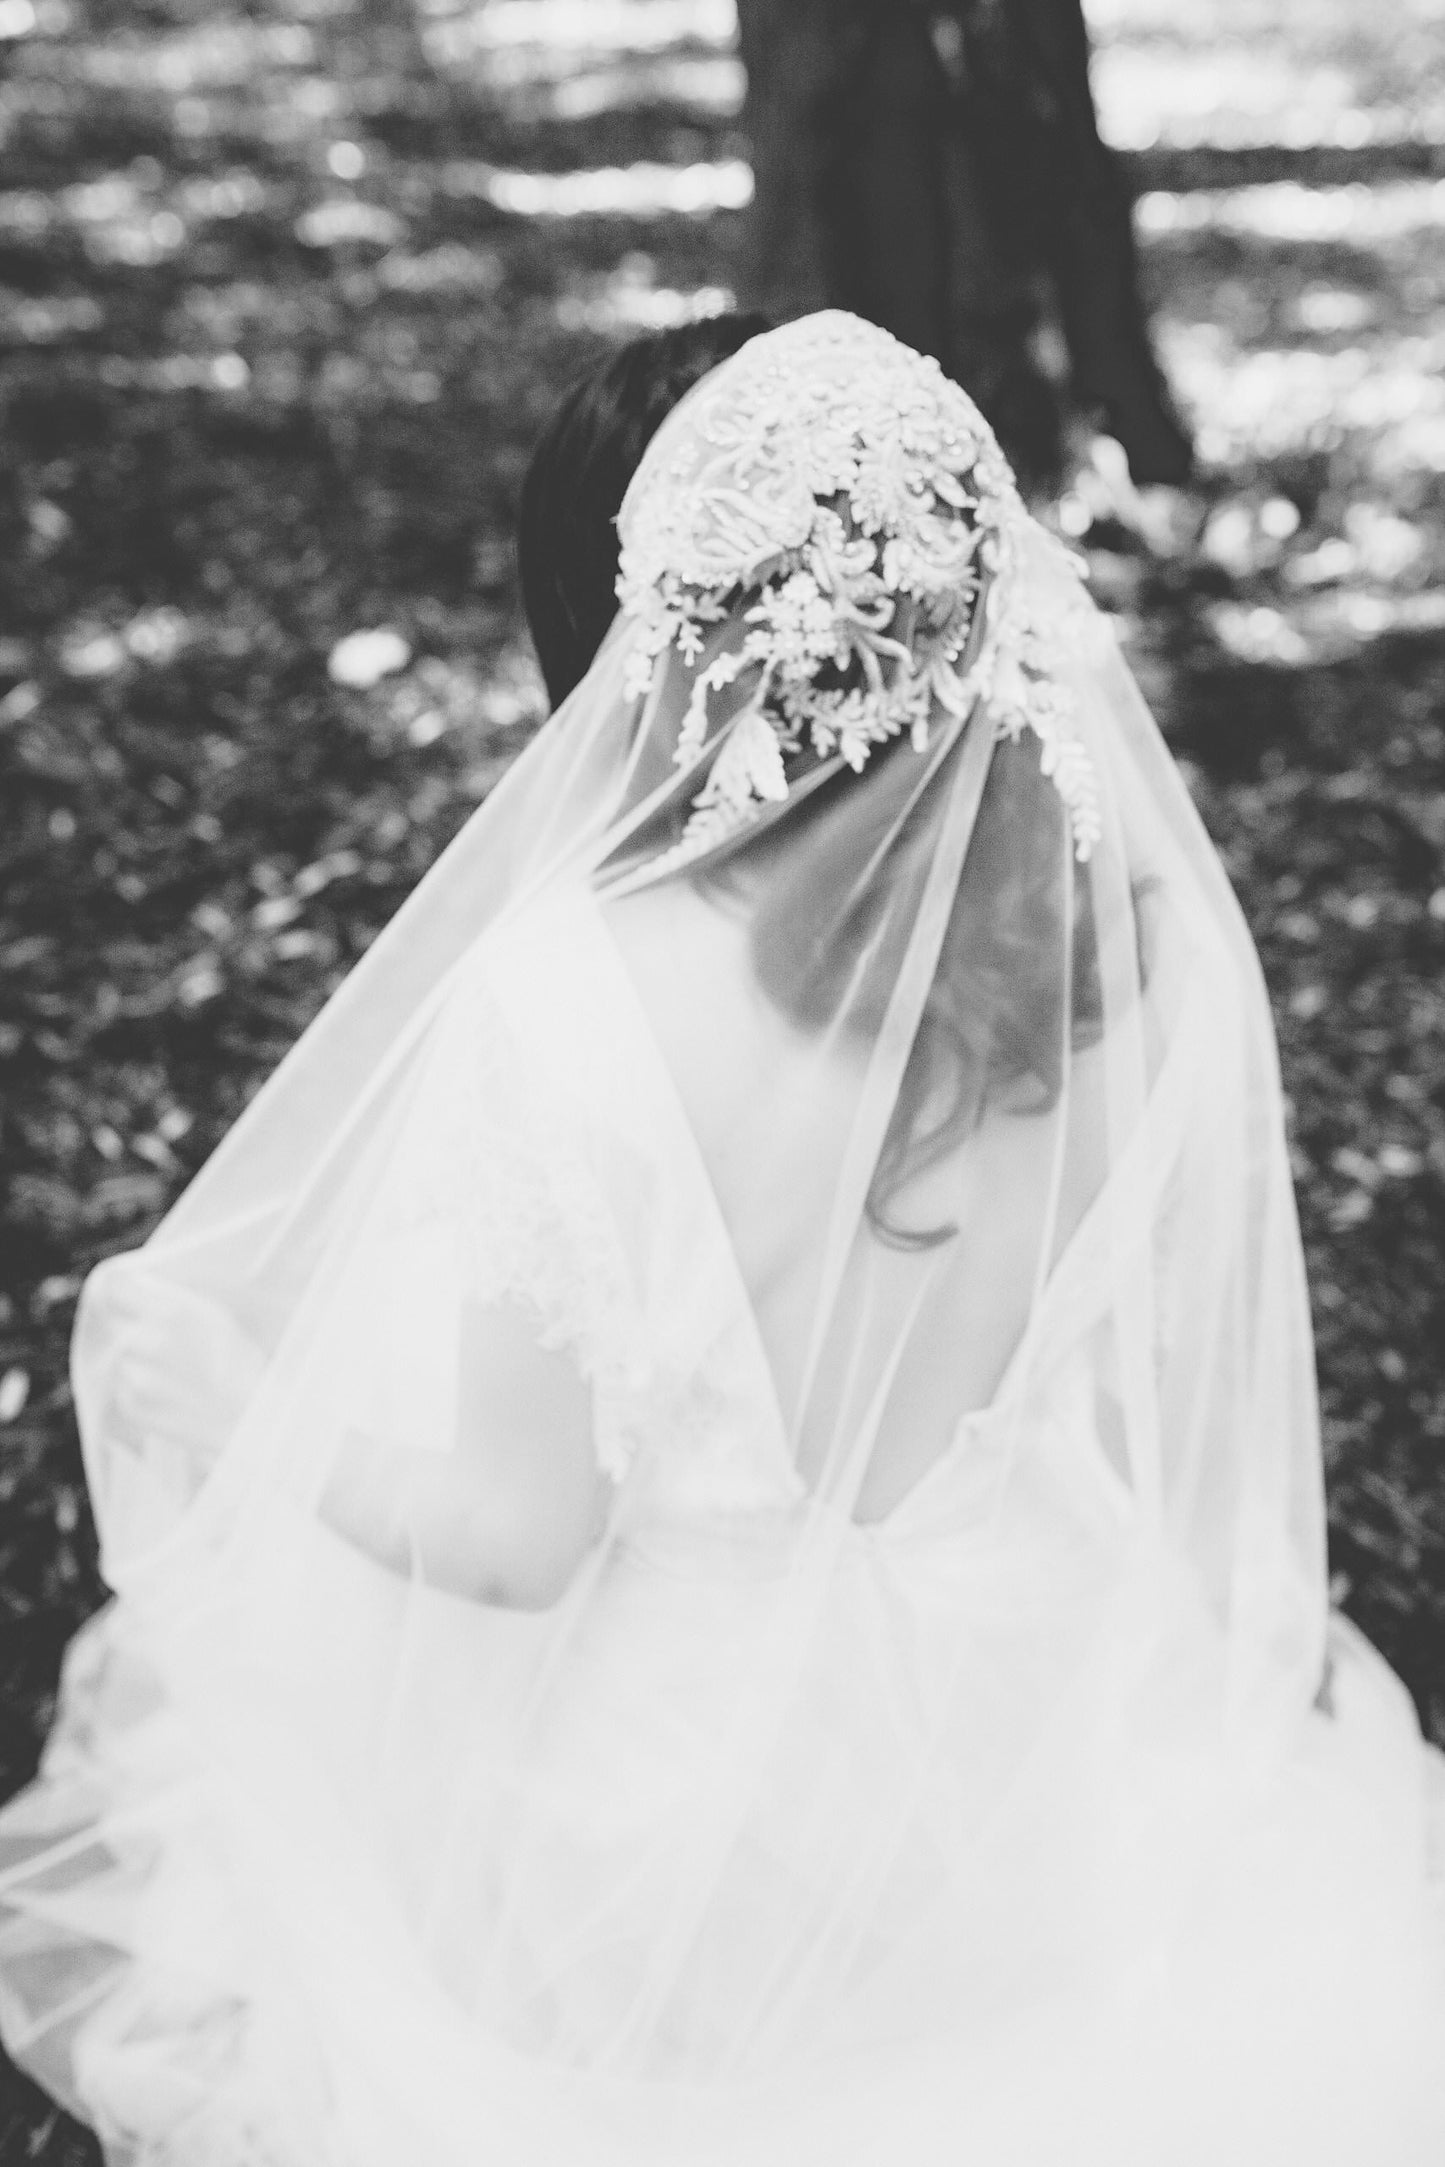 Bridal Veil Made From Mother's Wedding Dress